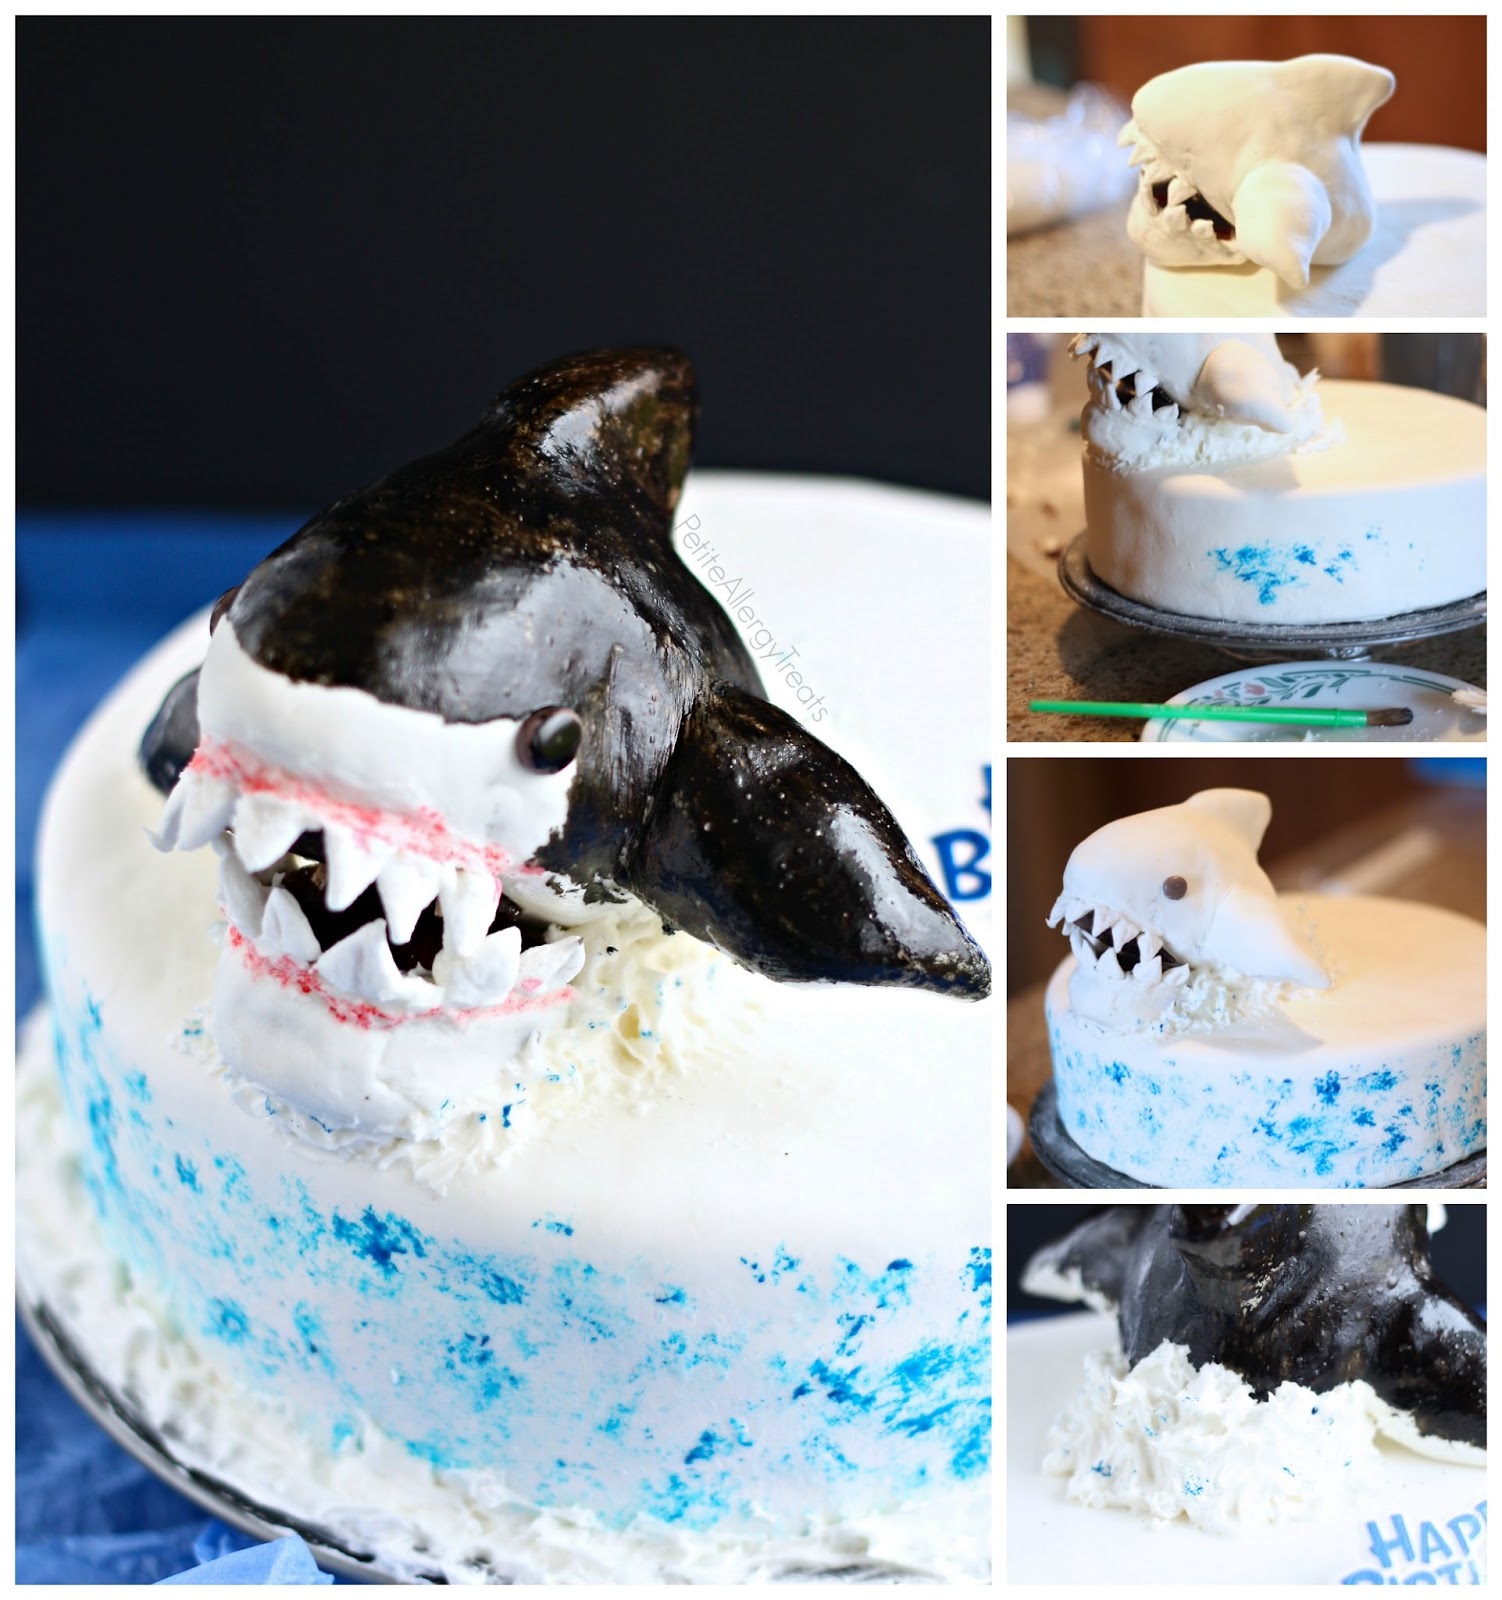 Shark Cake Tutorial (egg free dairy free gluten free) This marshmallow fondant chocolate cake is a scary shark perfect for shark week or a birthday party. Sub Vegan marshmallows to make Vegan.